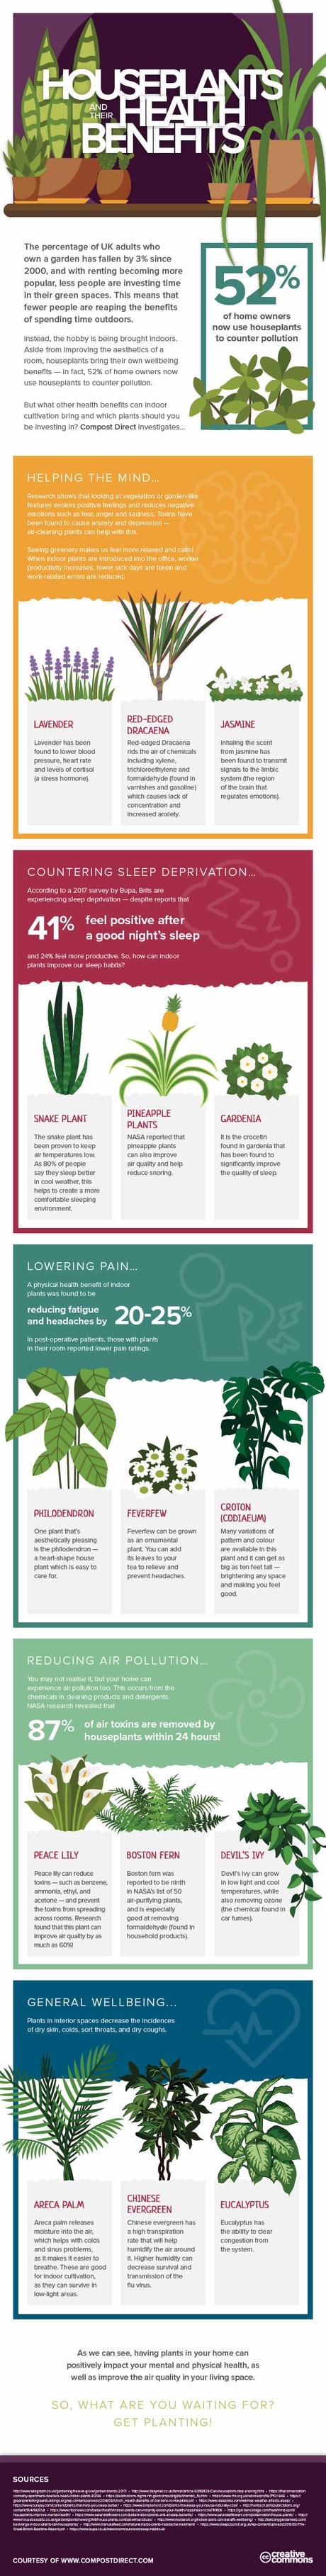 Houseplants and how they can improve your health